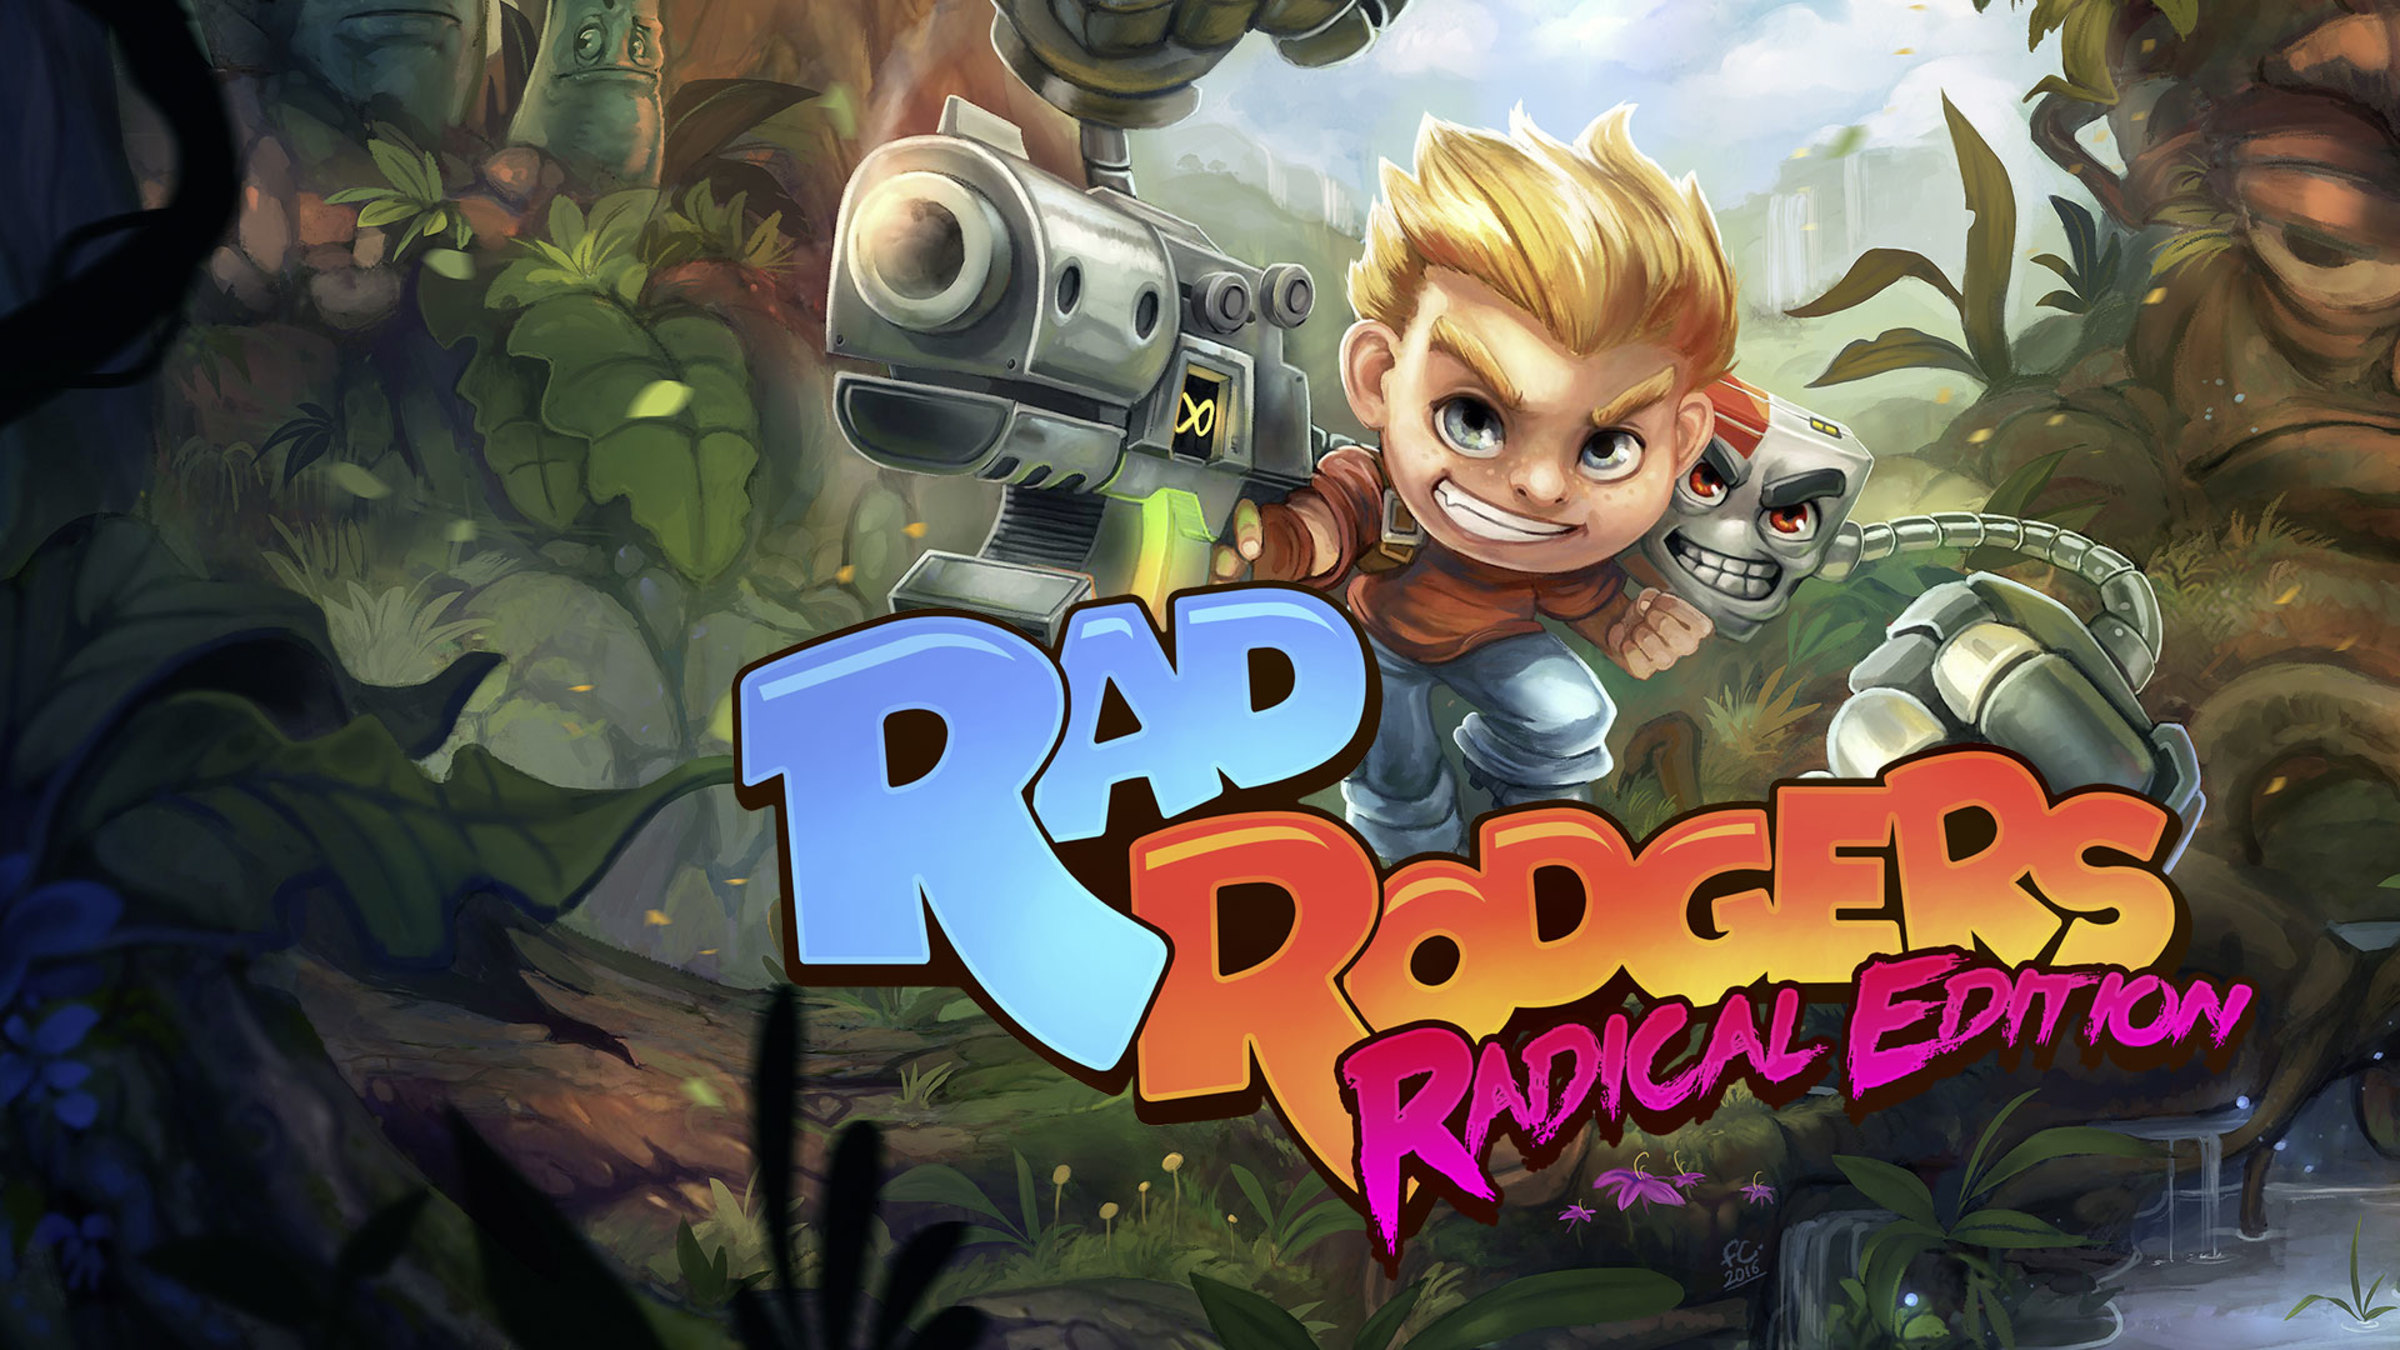 Rad Radical Edition for Nintendo Switch Nintendo Official Site